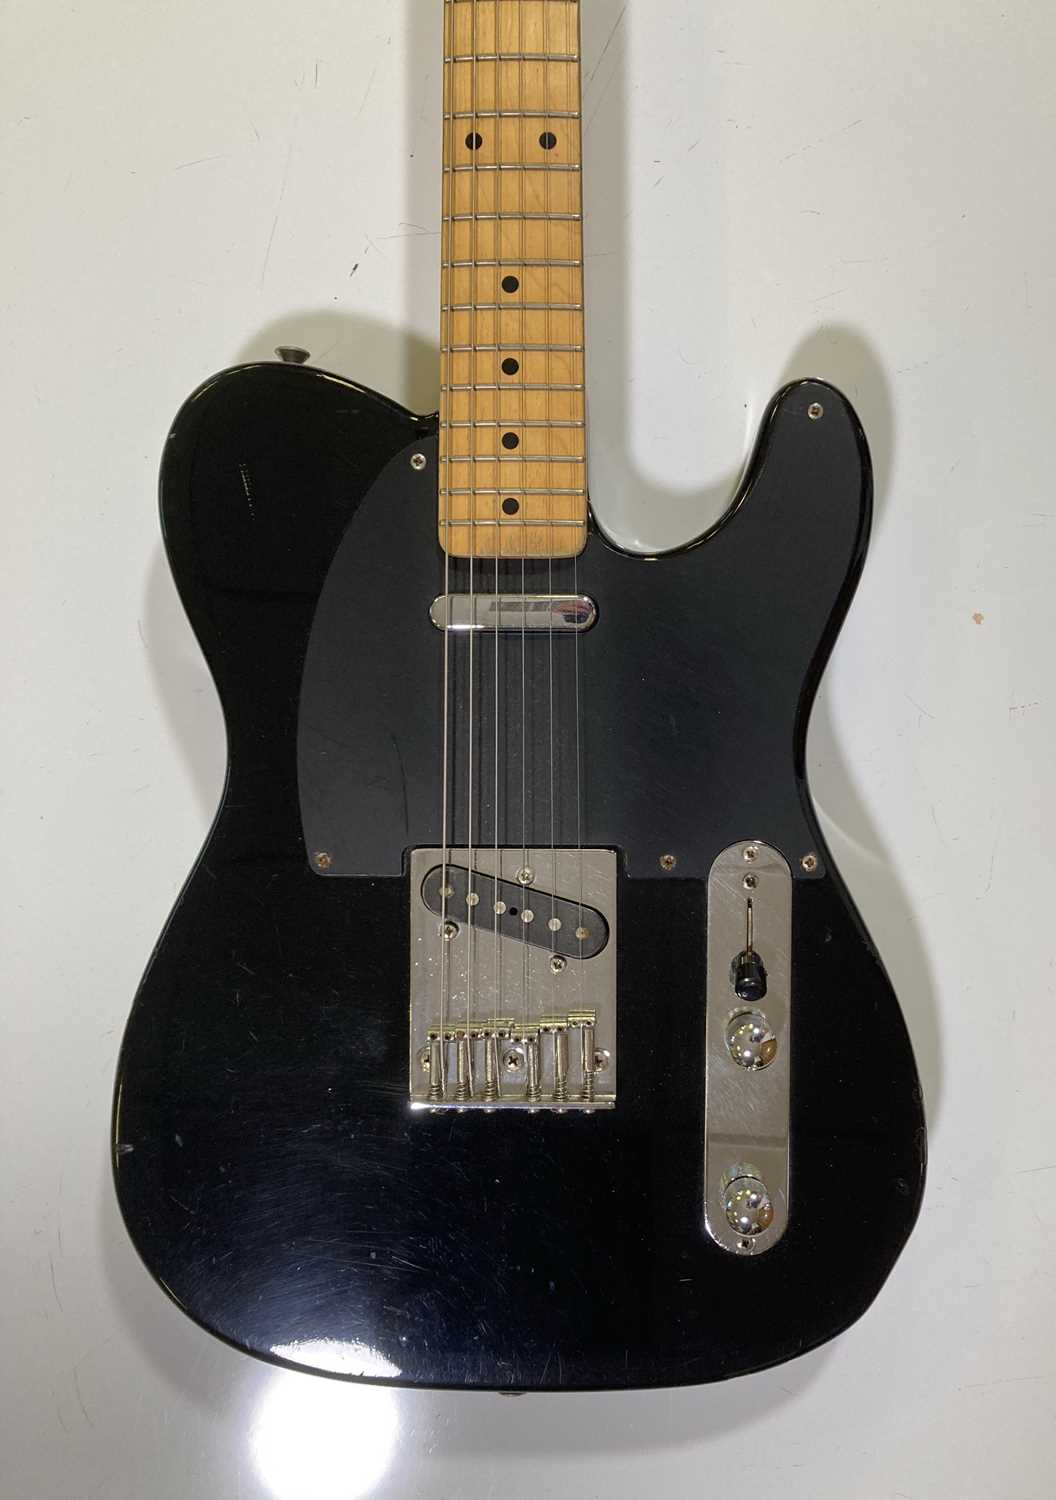 Lot 45 - FENDER SQUIRE TELECASTER ELECTRIC GUITAR.